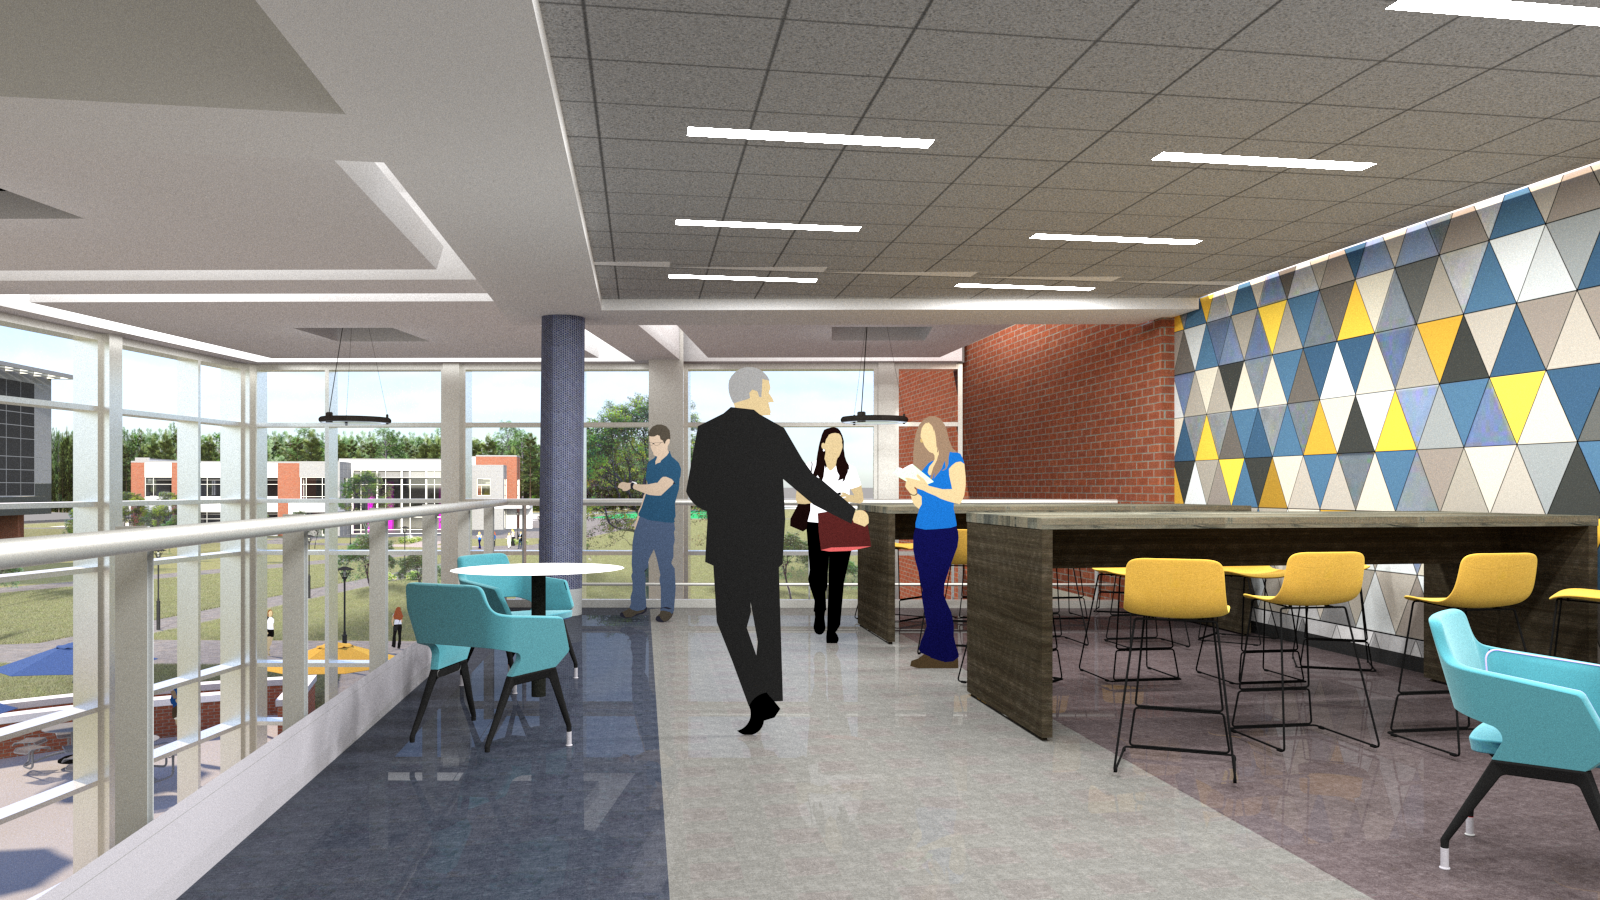 Architectural rendering of the upper deck in the Center for Health Sciences and Active Learning